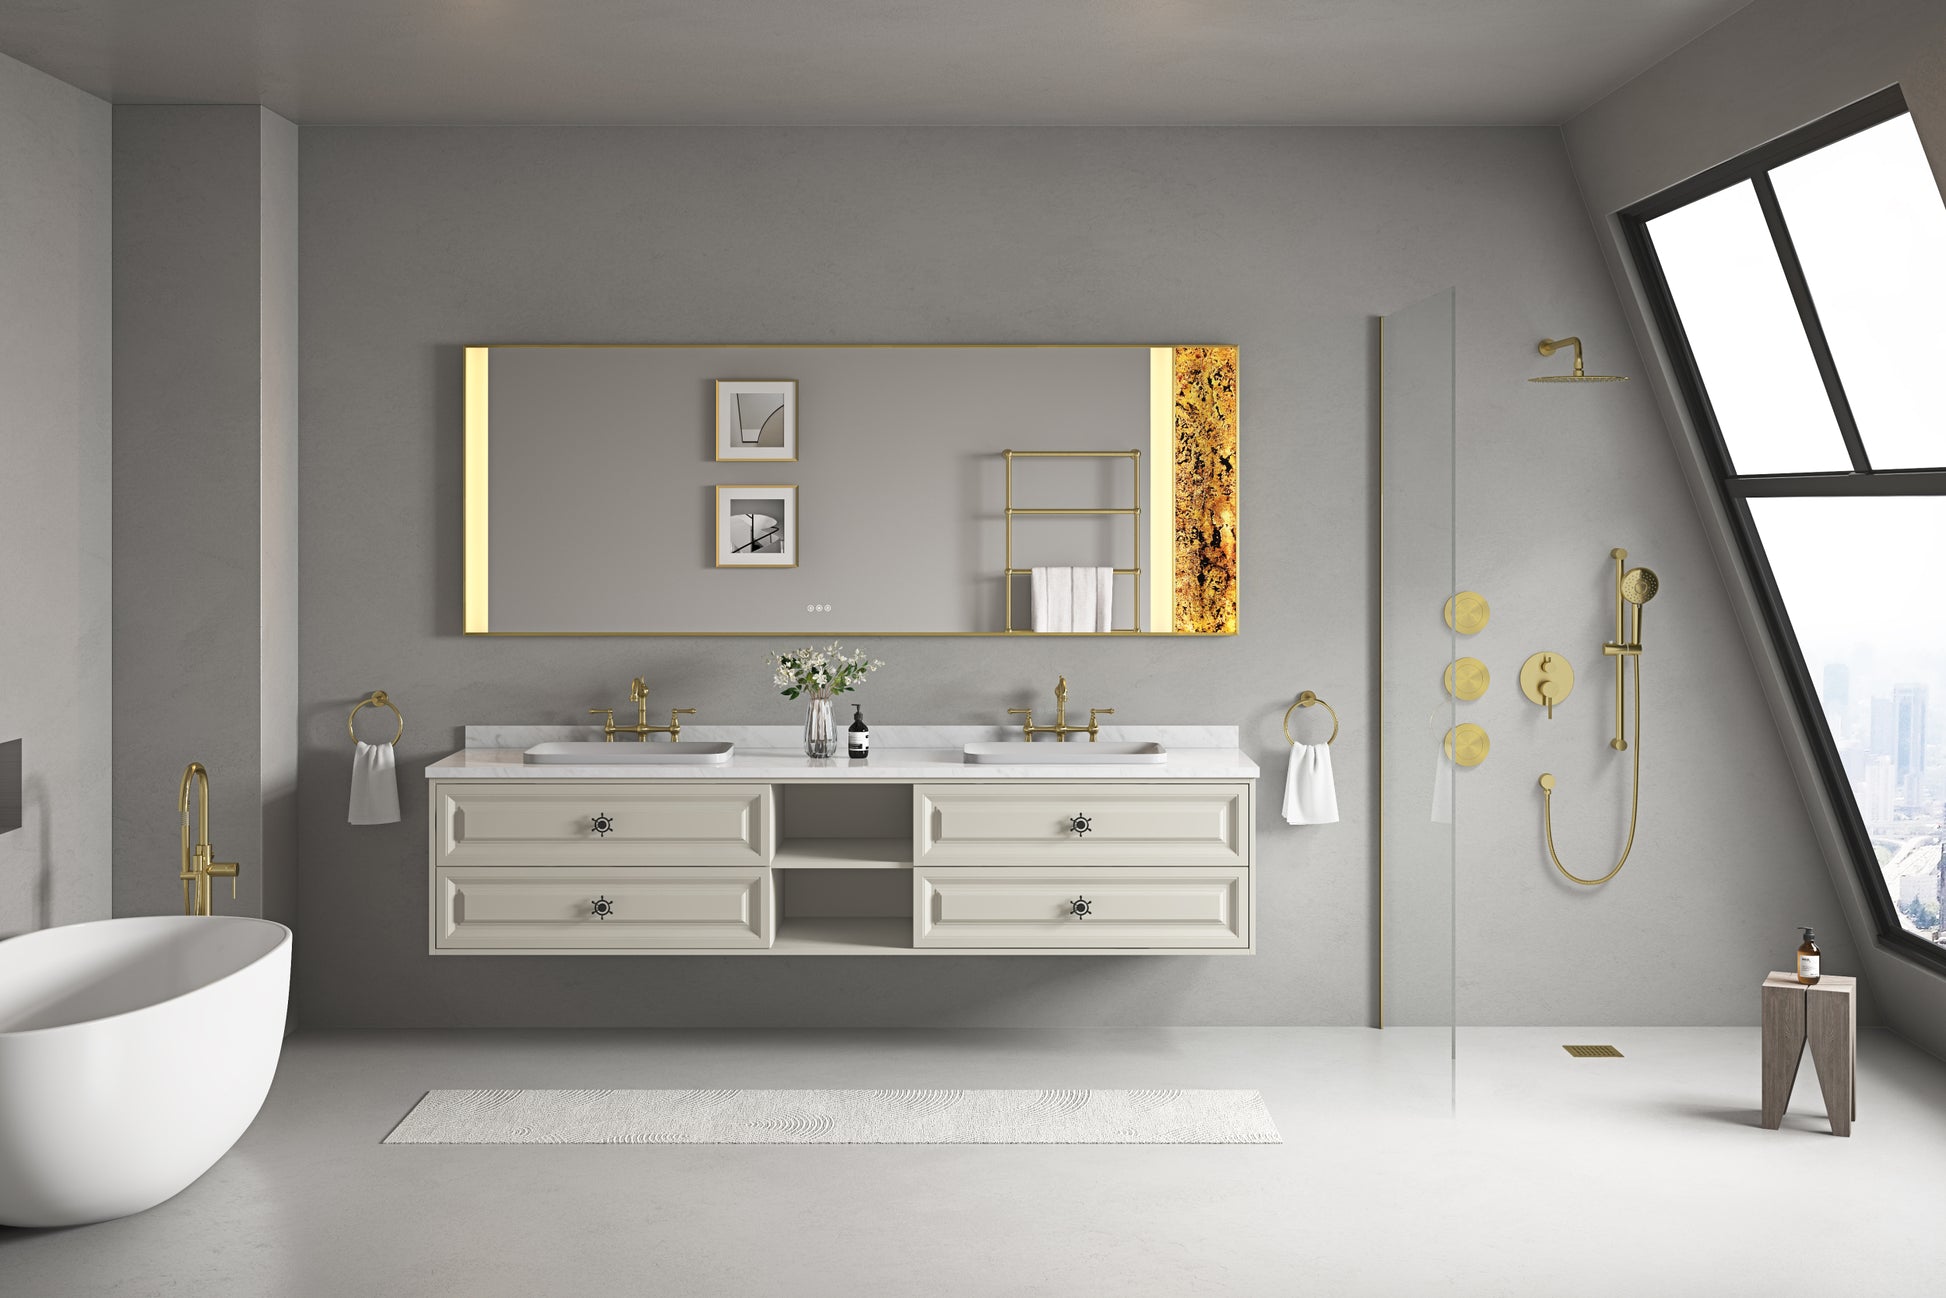 96*23*21in Wall Hung Doulble Sink Bath Vanity Cabinet khaki-abs+steel(q235)+wood+pvc